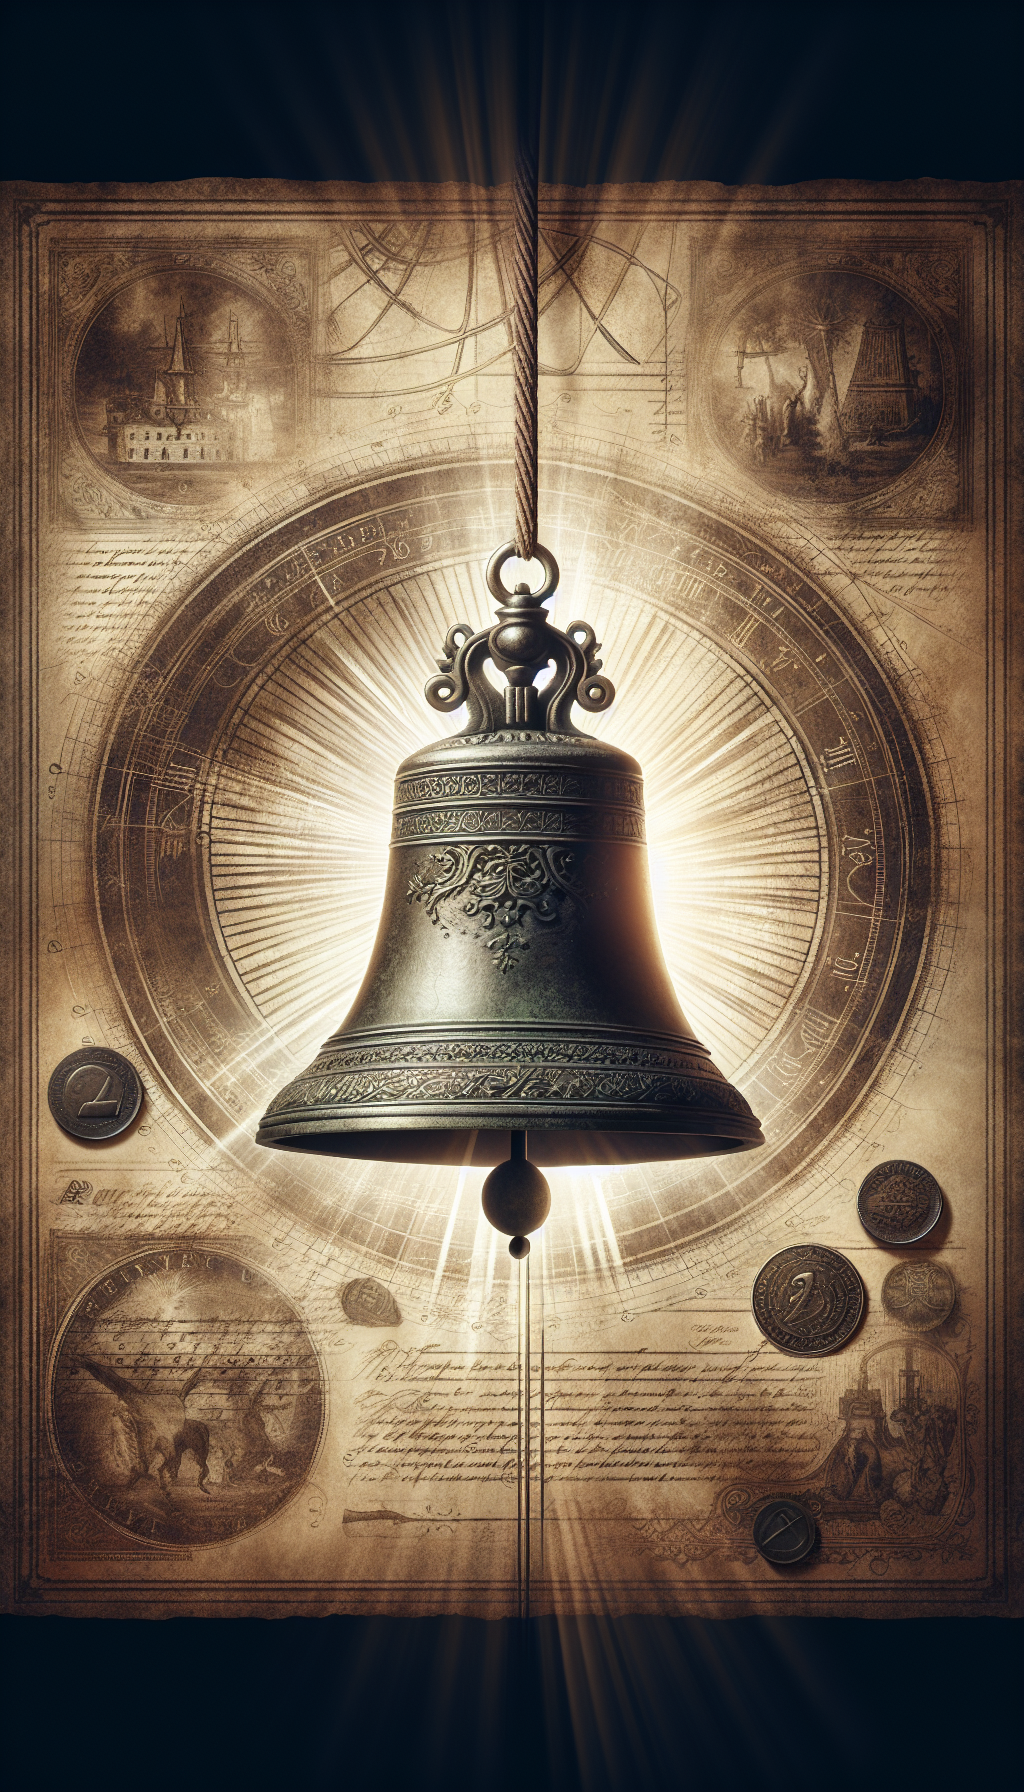 An antique cast iron bell hangs majestically in the center, framed by a faded parchment background that hosts ghostly etchings of historical events. A beam of light shines upon the bell, illuminating its intricate details, while faded coins and currency swirl around it, symbolizing its value. 

16:9